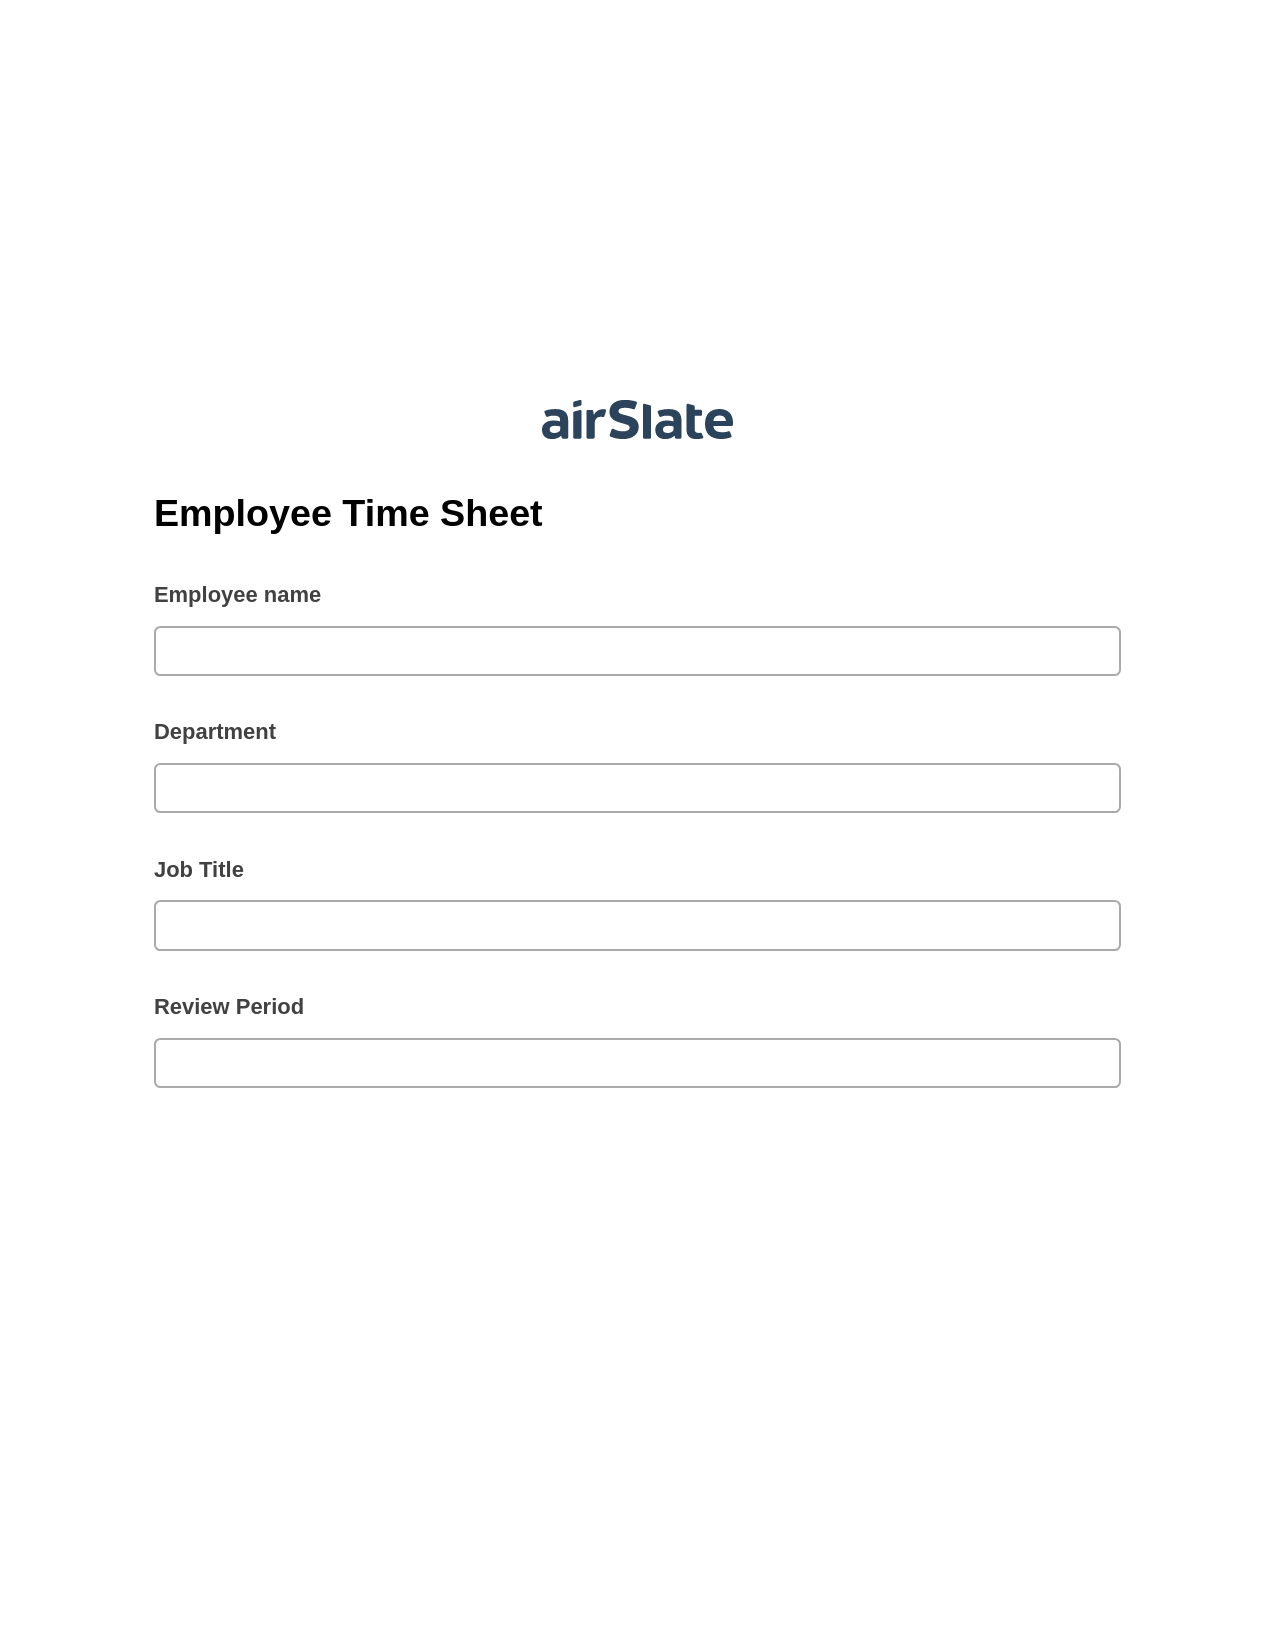 Employee Time Sheet Pre-fill Dropdowns from CSV file Bot, Create Salesforce Records Bot, Post-finish Document Bot